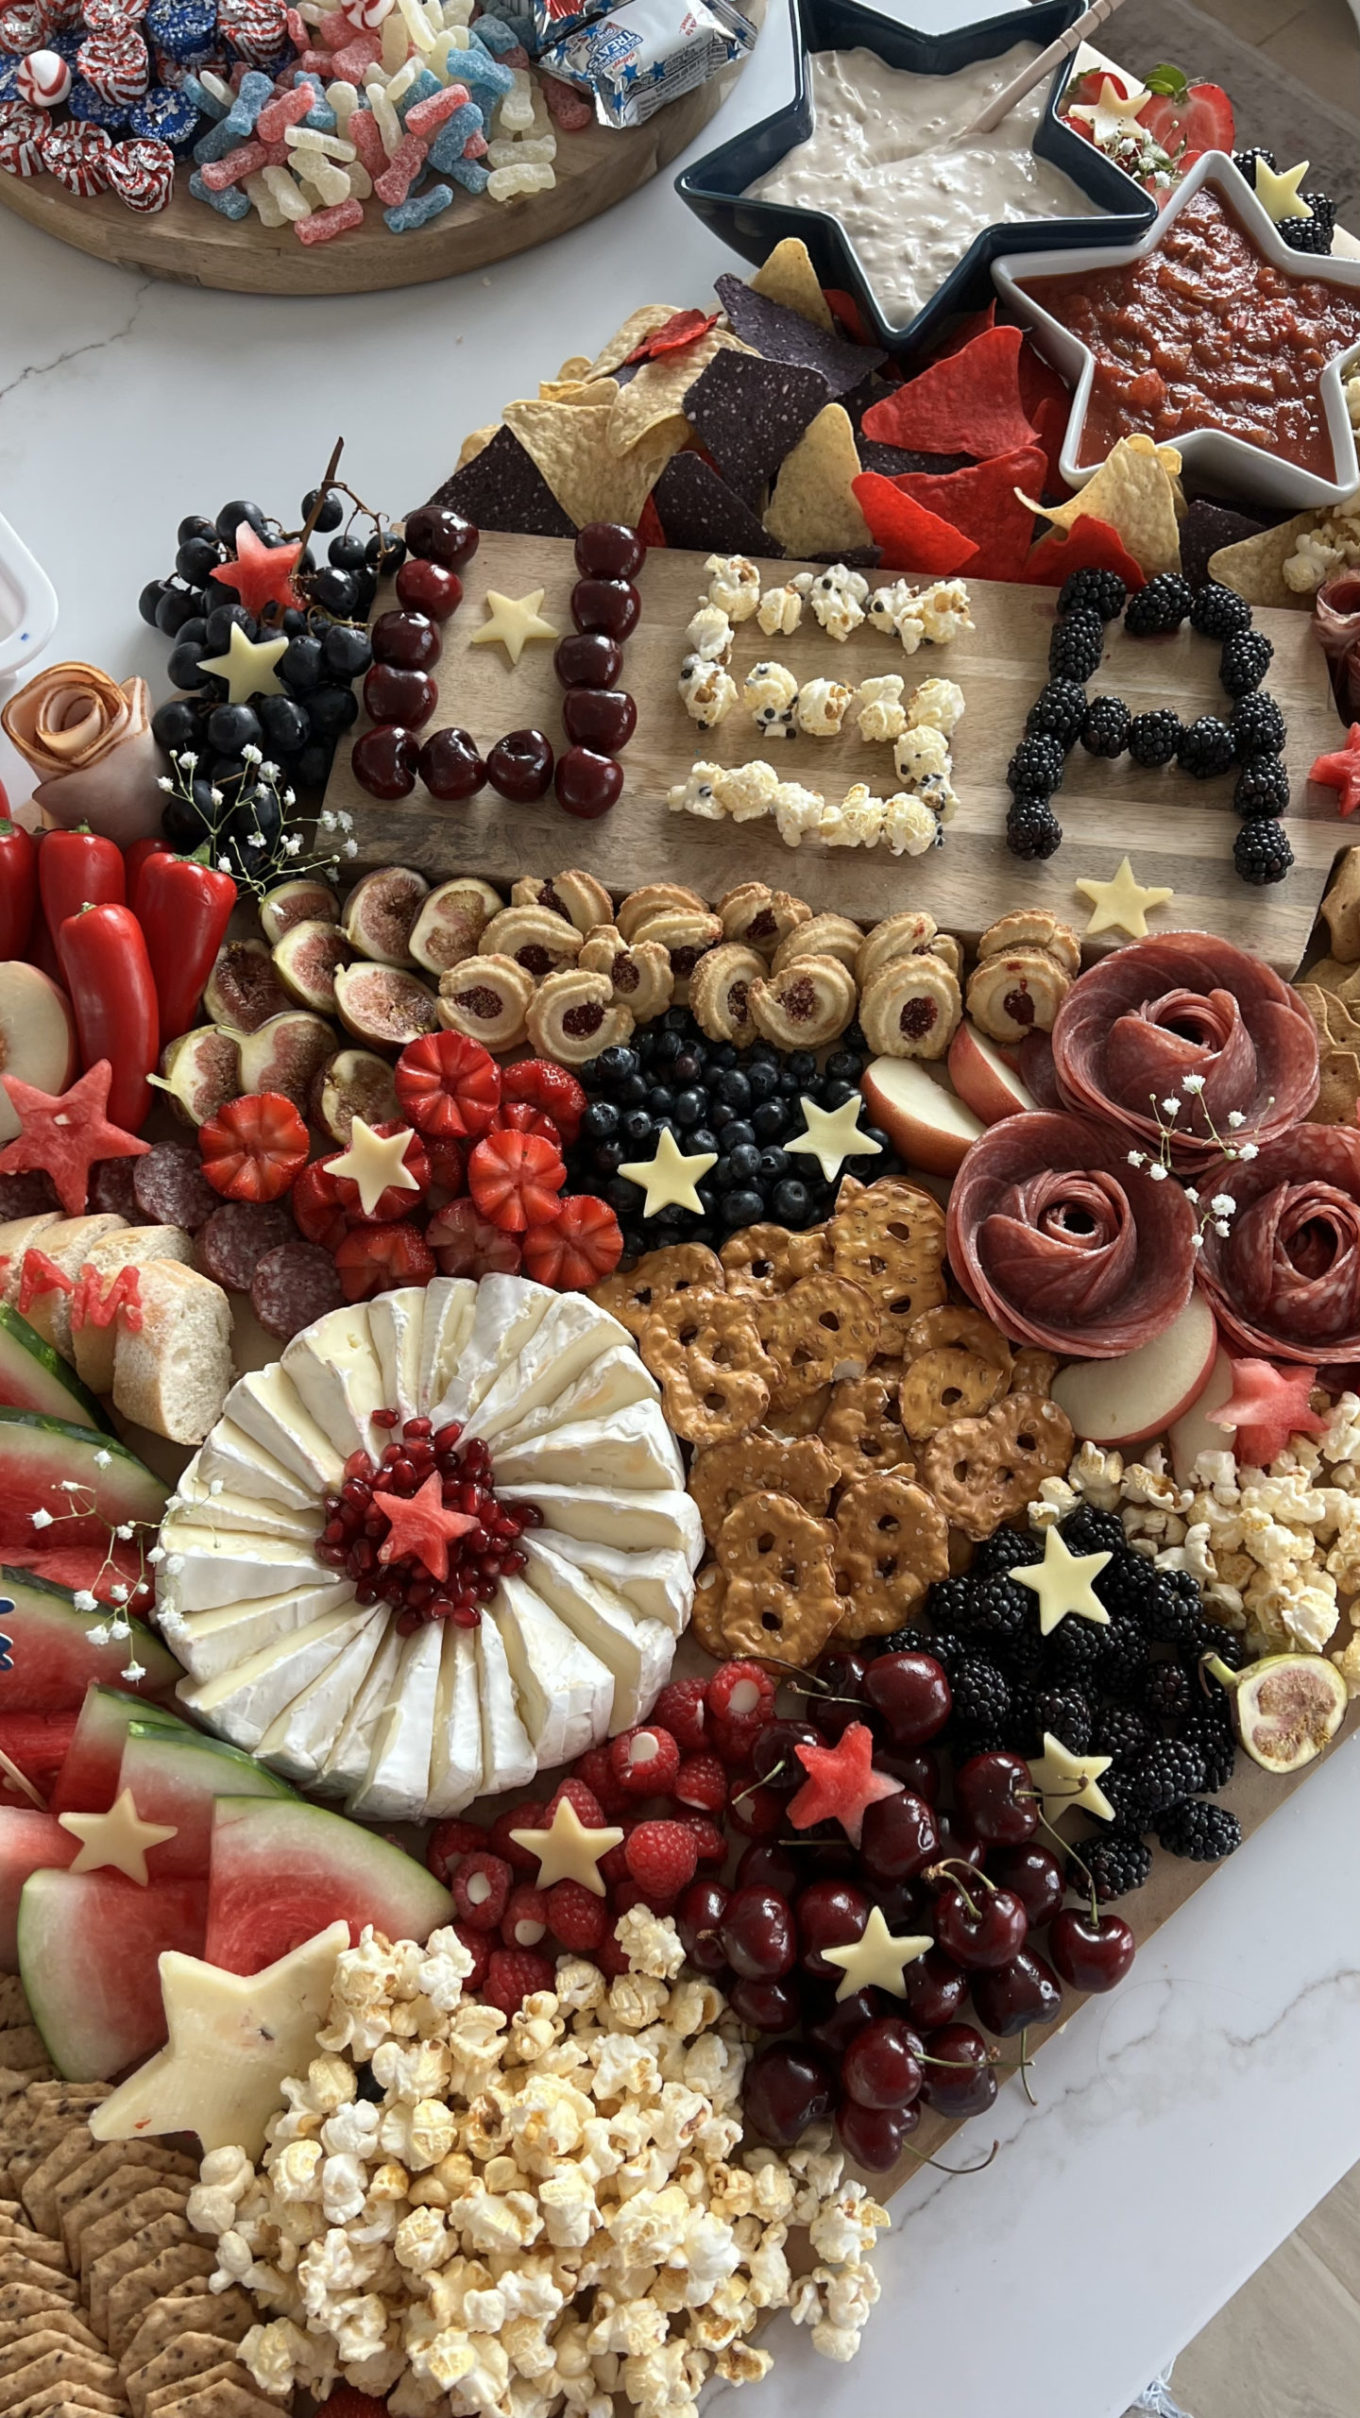 Fourth of July, 5 party hacks, 4th of July party, festive fruit, color coordinated fruit, charcuterie spread, party spread, charcuterie board, Sams club, 4th of July, 4th of July charcuterie board